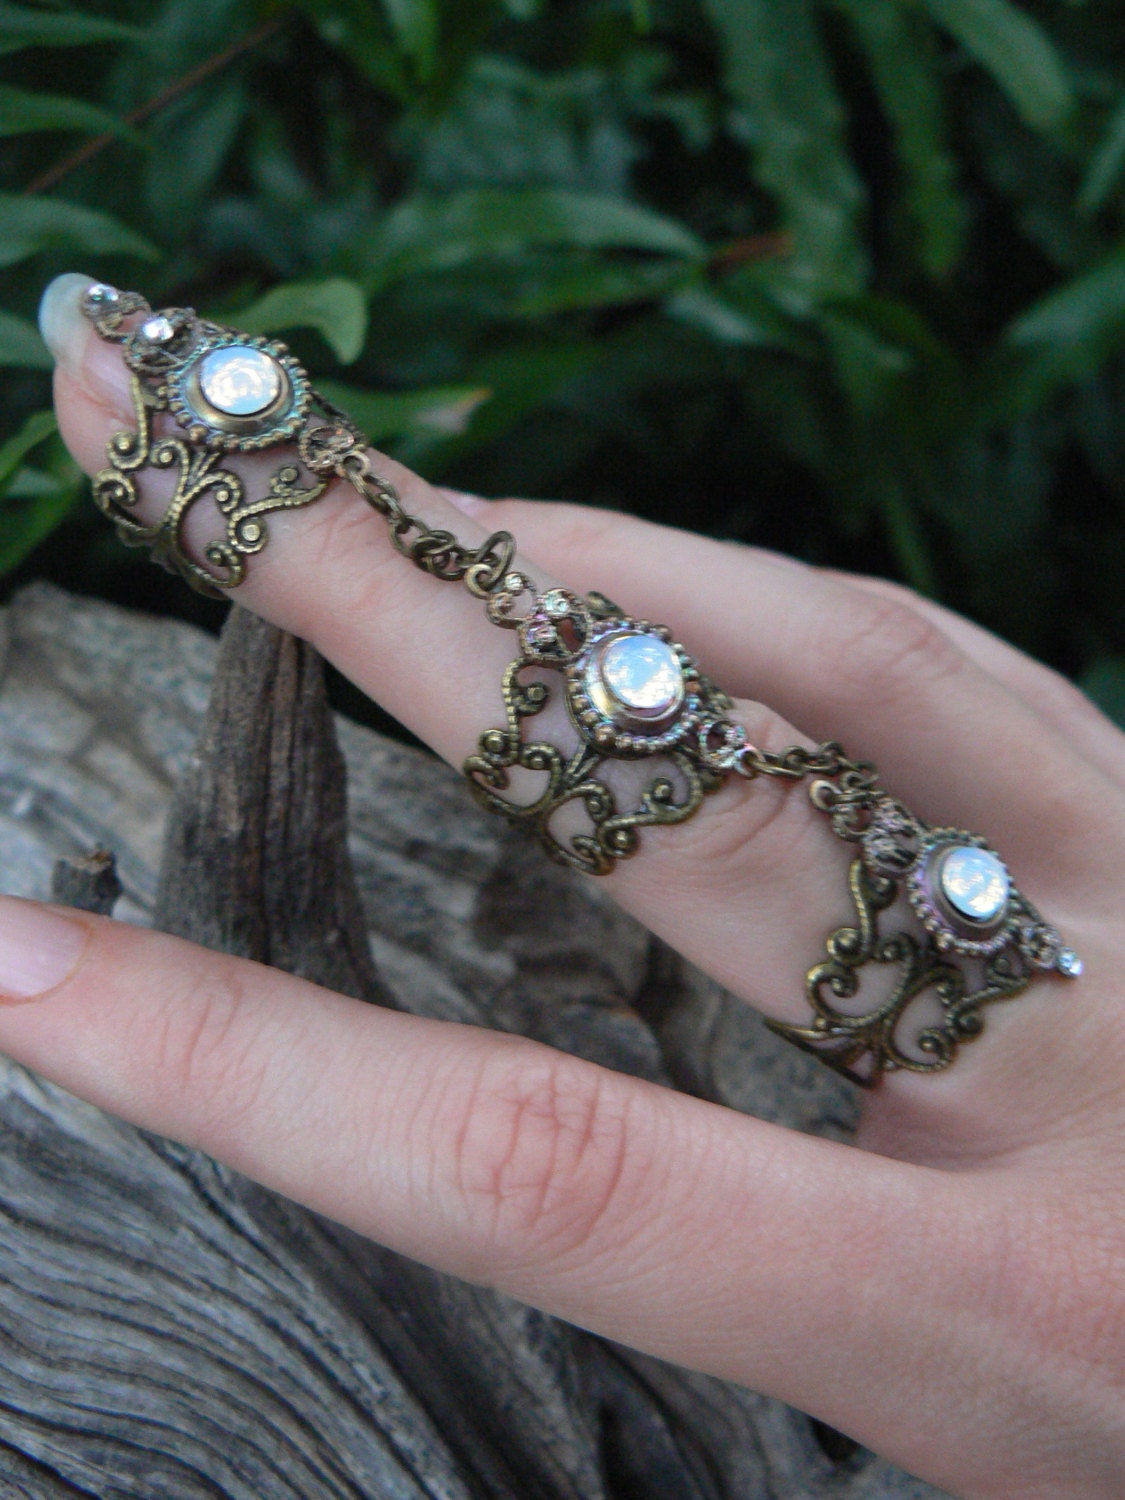 triple armor ring nail ring  opal glass claw ring knuckle ring statement ring victorian steampunk moon goddess pagan witch boho gypsy style